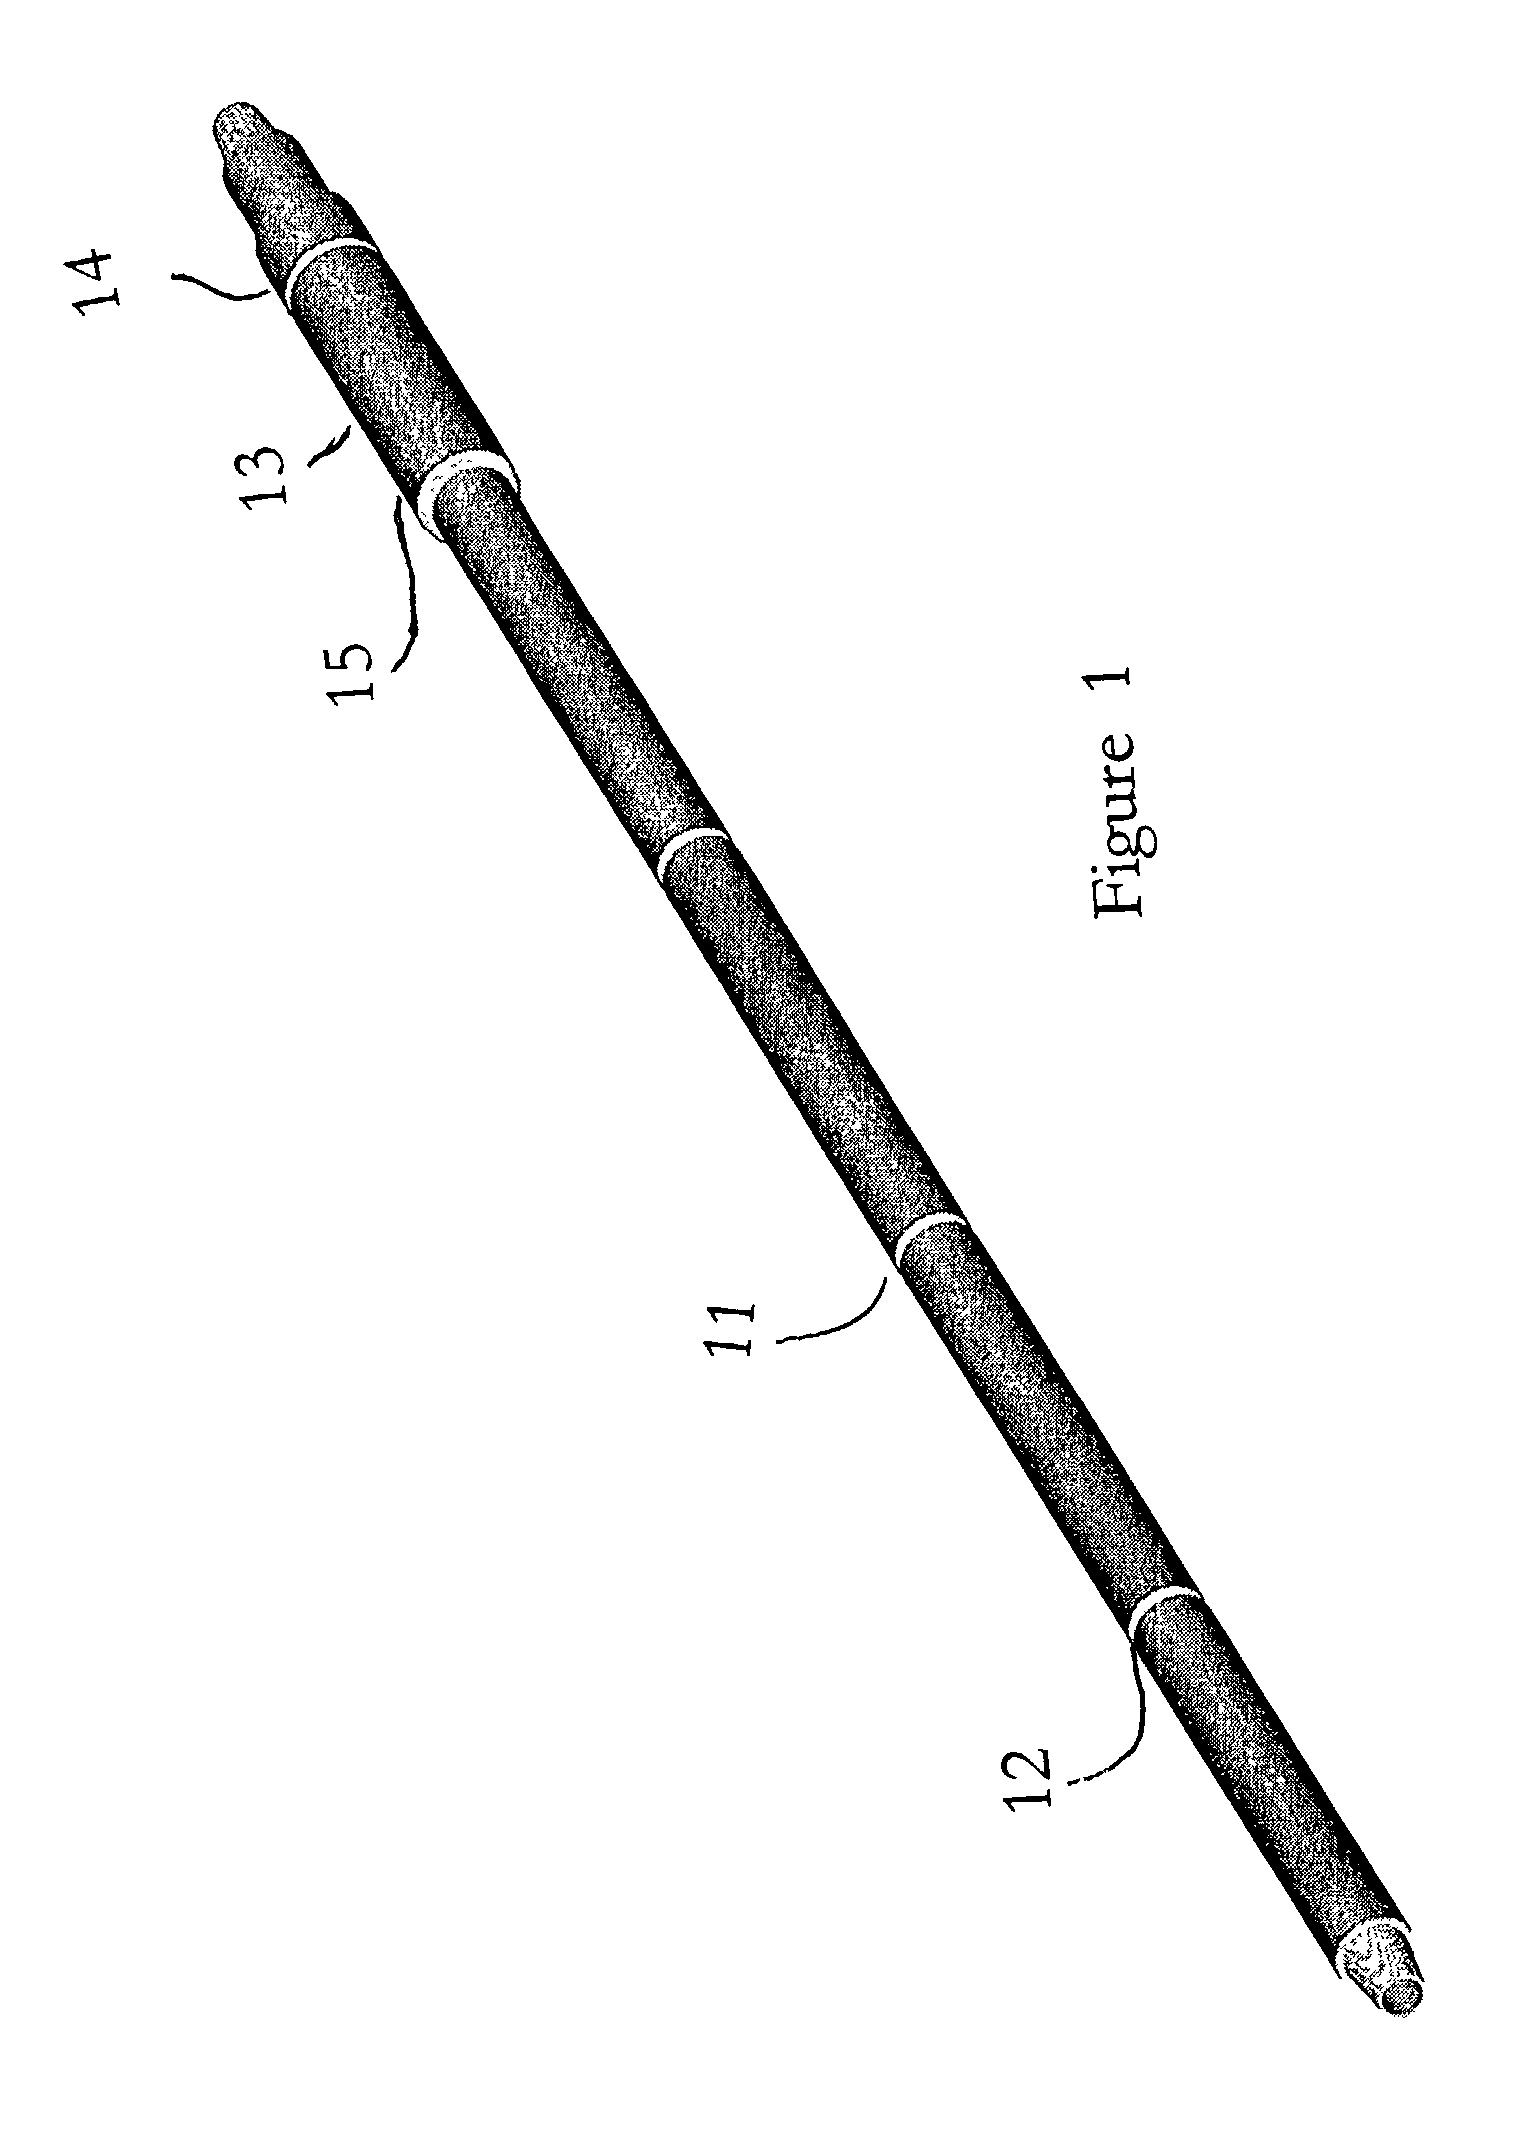 Signal connection for a downhole tool string